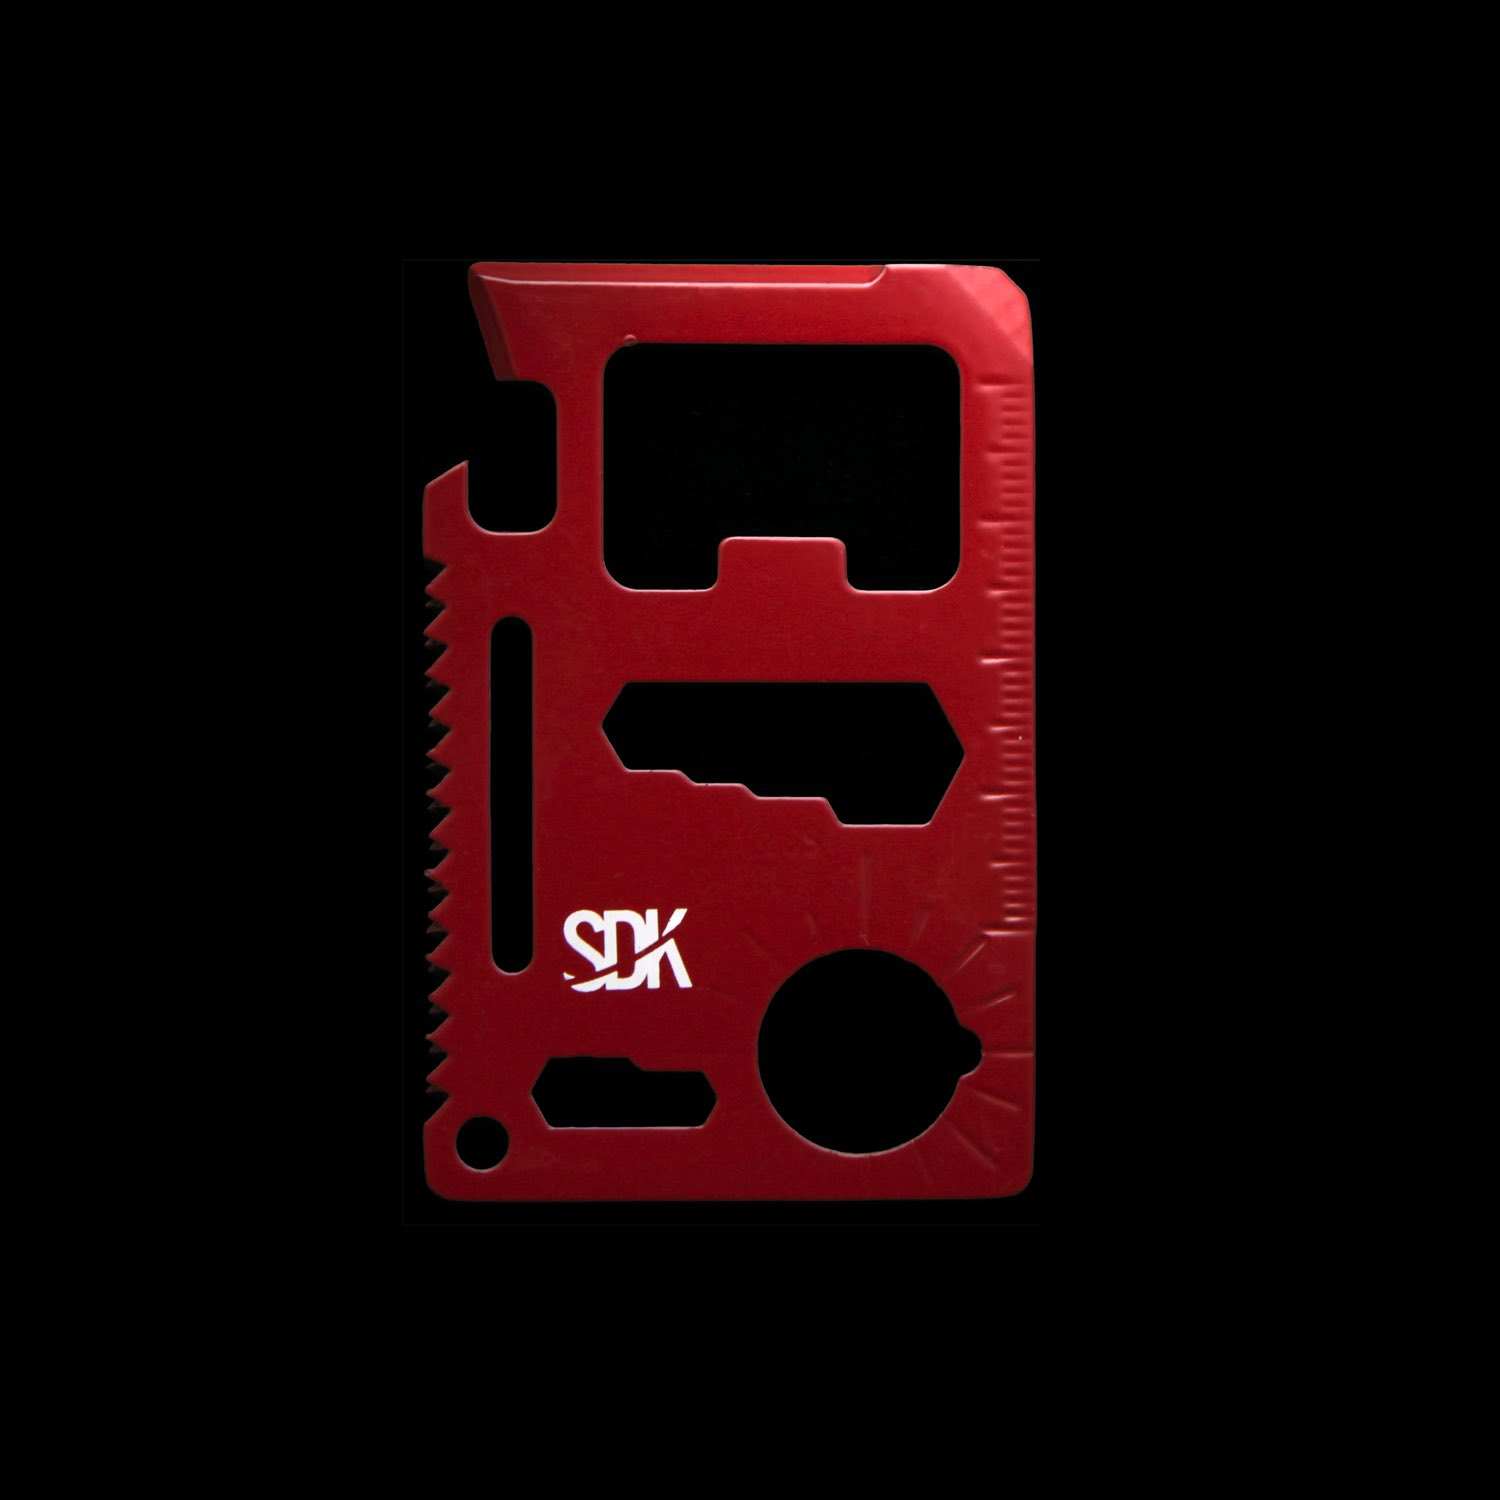 SDK Multi Card Tool, Red (credit card sized stainless steel tool with 10 functions: Can opener, Knife edge, Screwdriver, Ruler, Cap opener, 2 Position wrench, 4 Position wrench, Butterfly wrench, Saw blade and Direction ancillary indication)